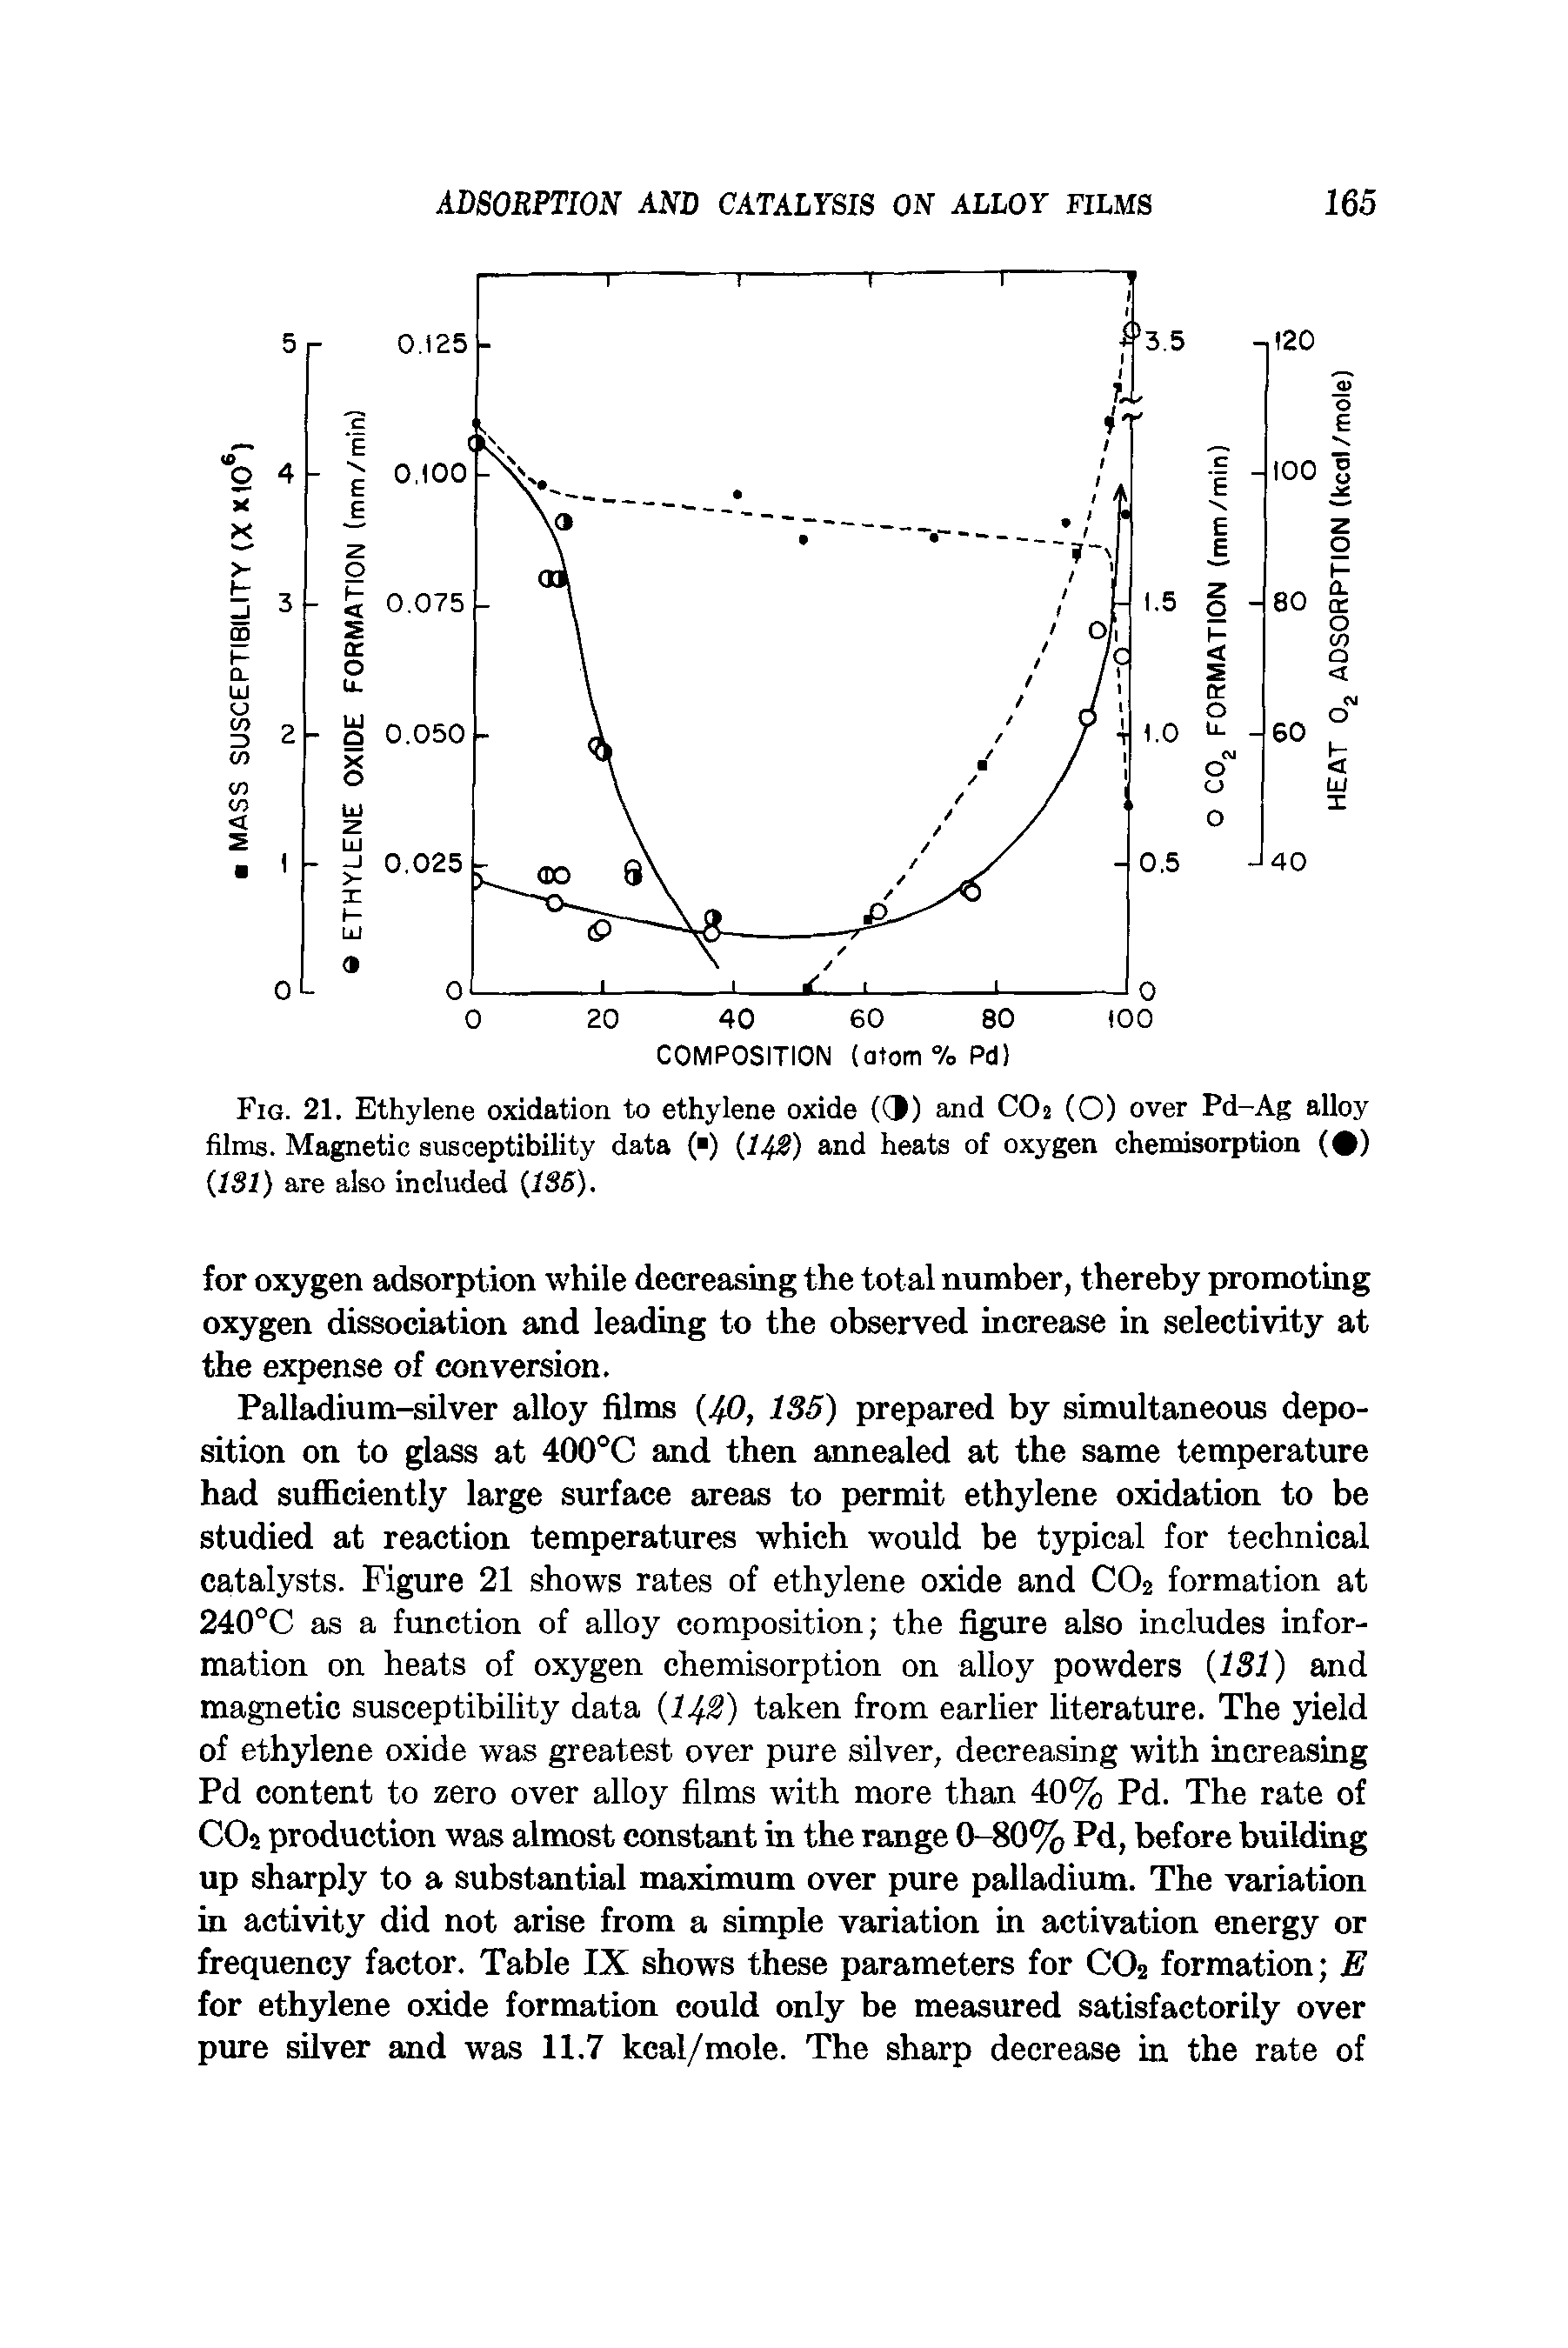 Fig. 21. Ethylene oxidation to ethylene oxide (O) and CO2 (O) over Pd-Ag alloy films. Magnetic susceptibility data ( ) (14%) and heats of oxygen chemisorption ( ) (.131) are also included (1S6).